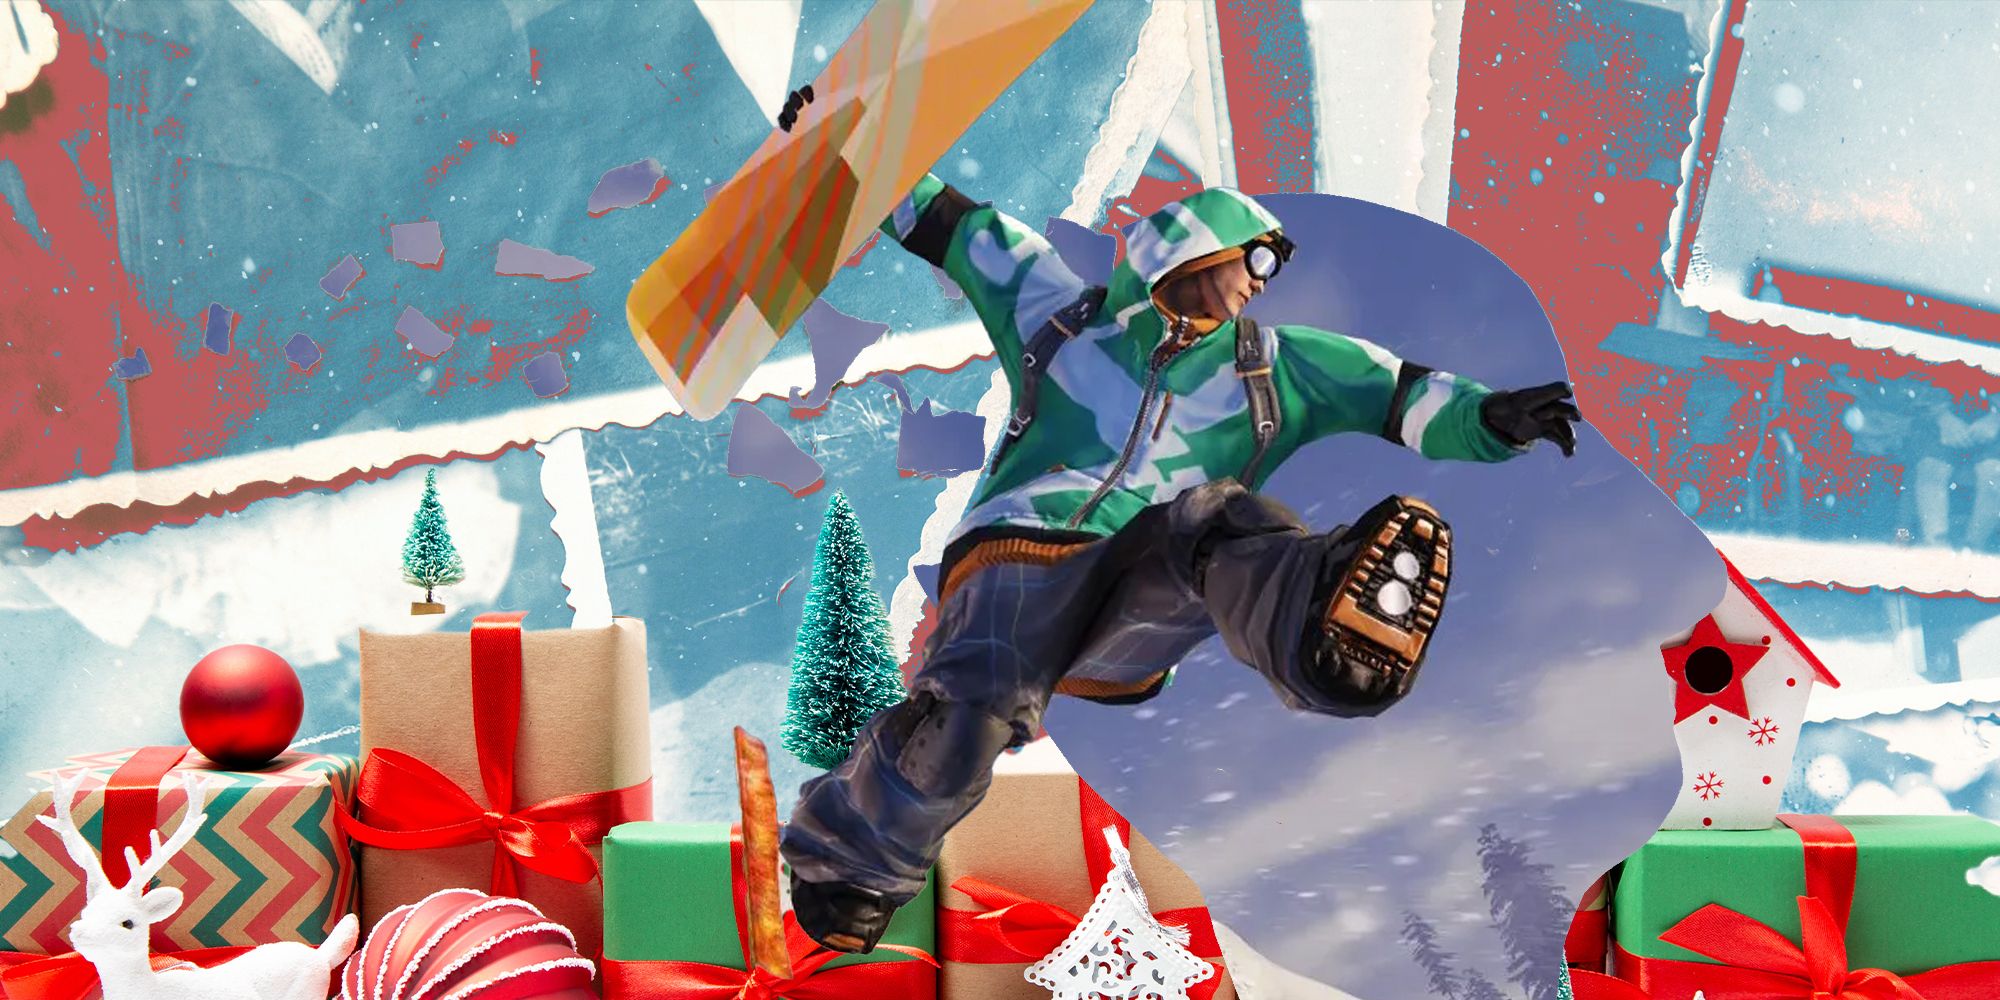 SSX snowboarder jumping out of wrapping paper